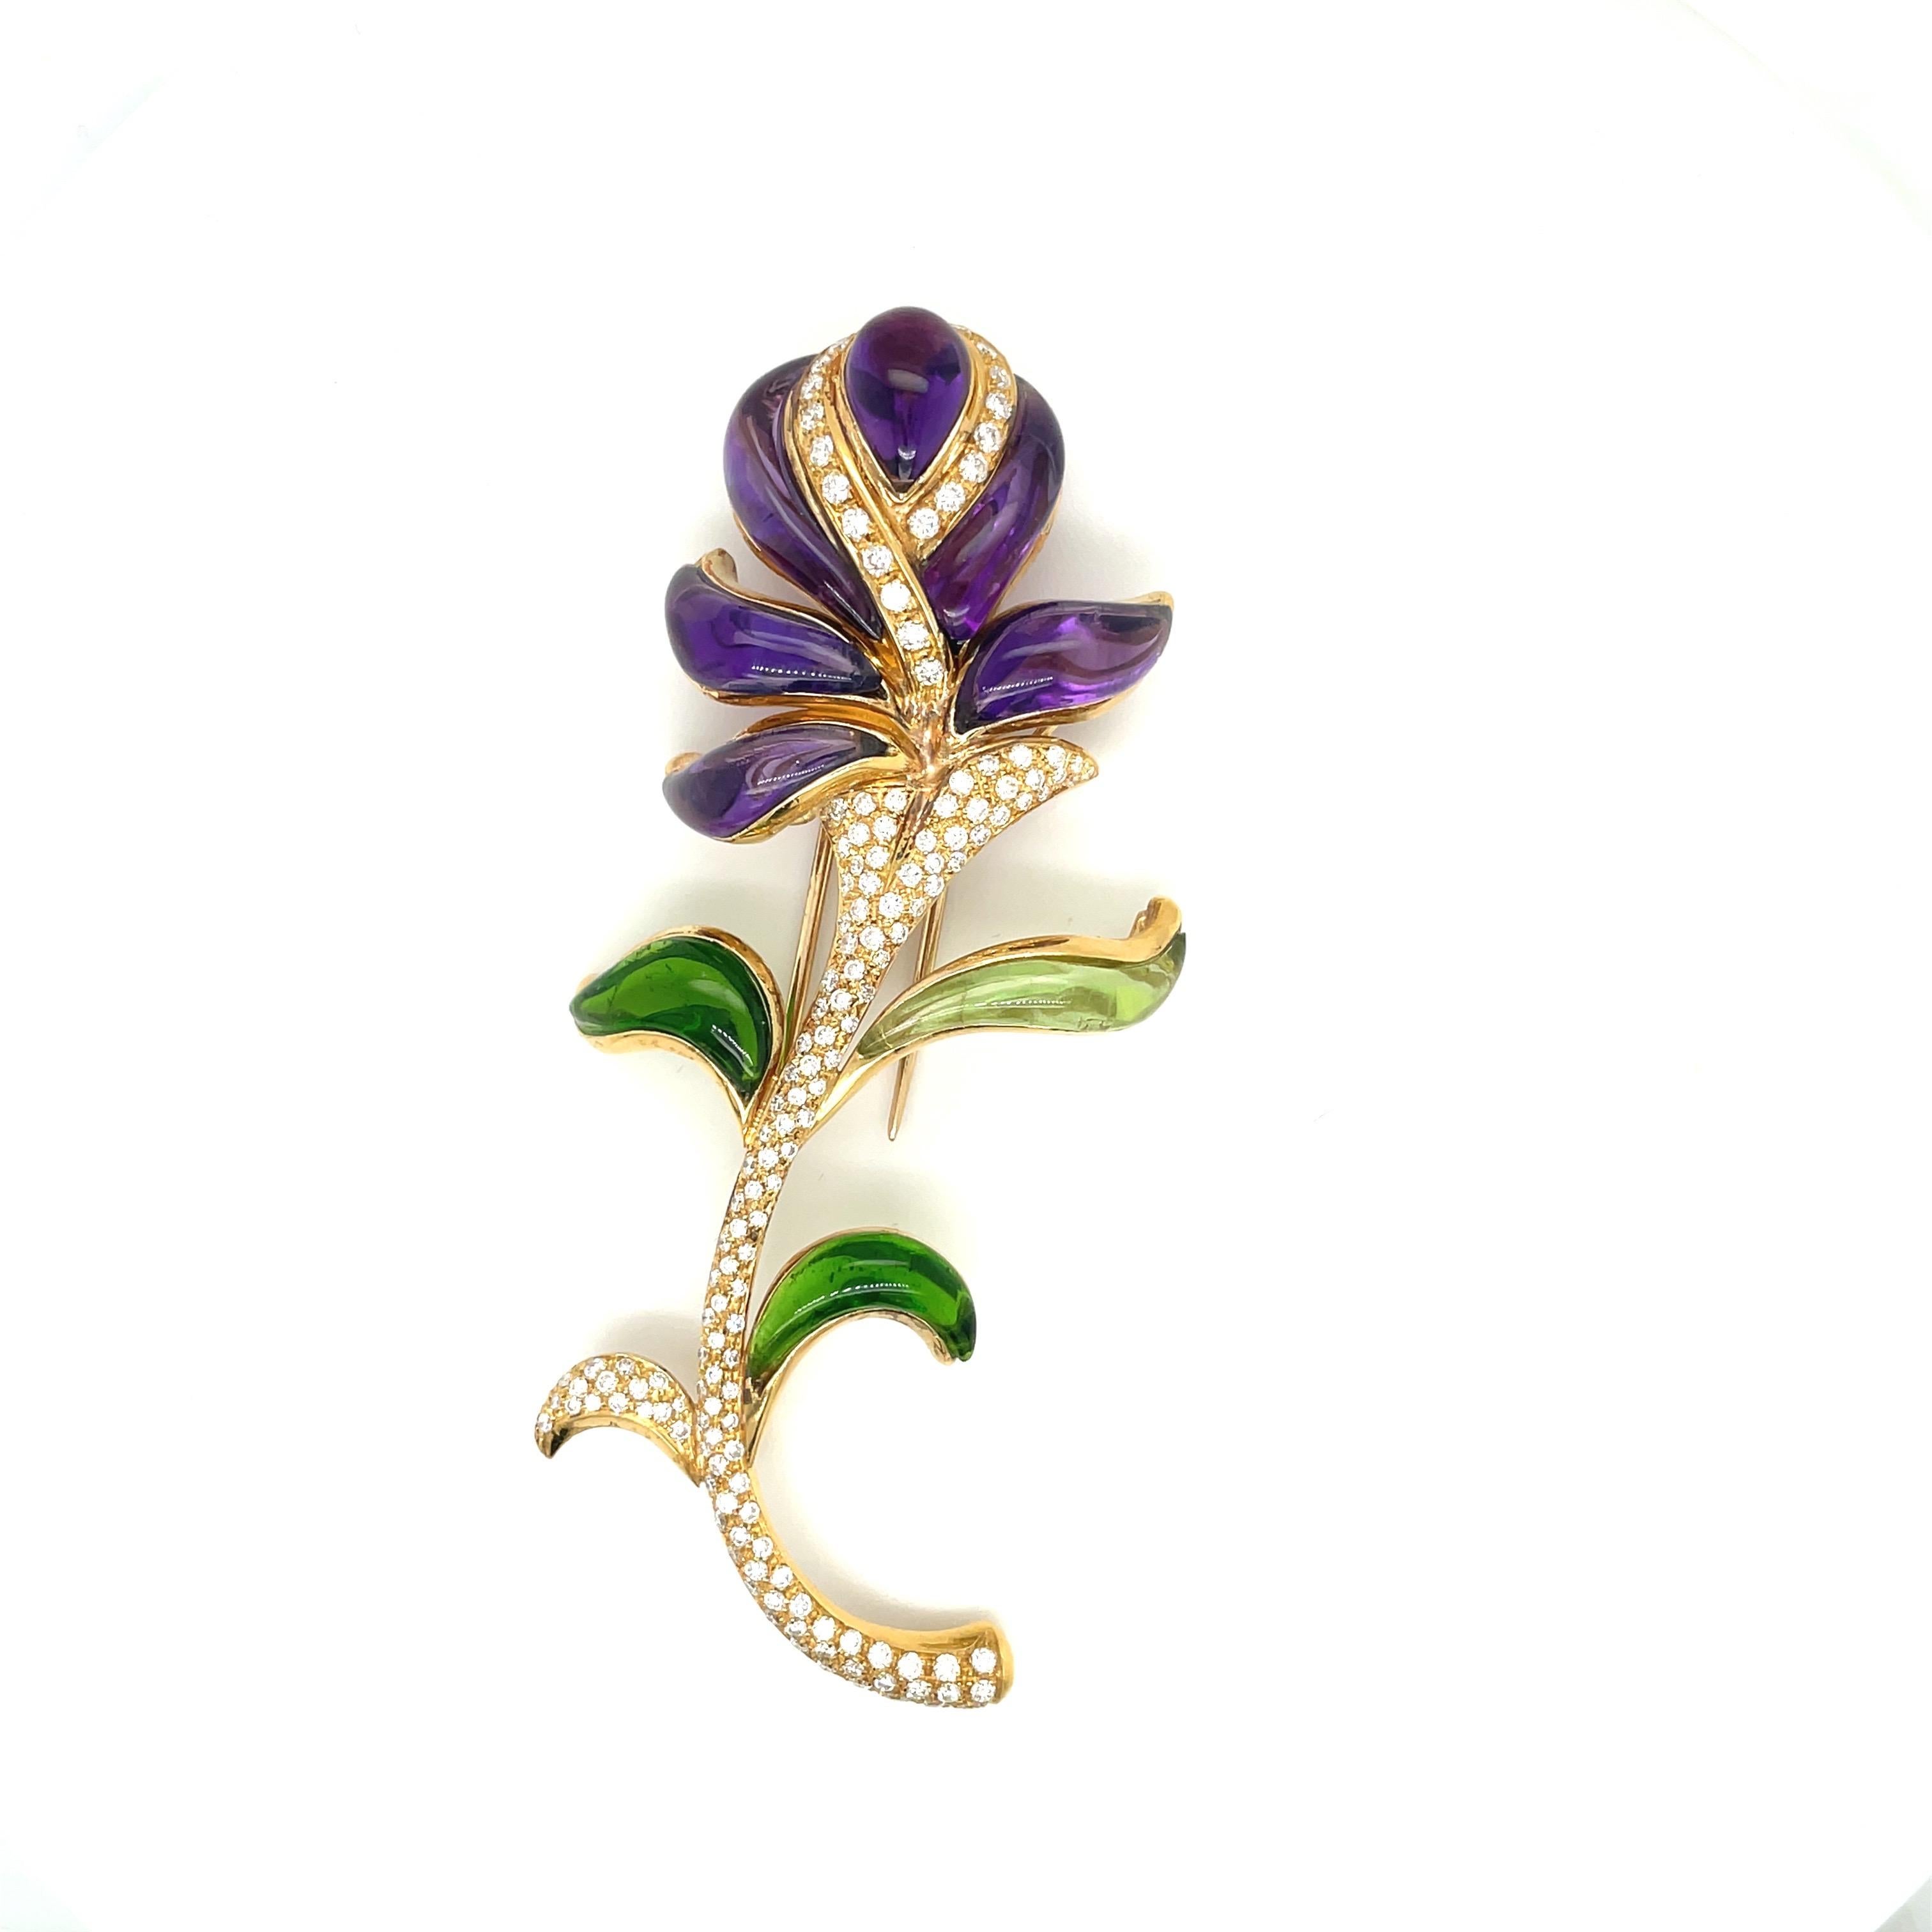 Made for Cellini by Roberto Casarin, this timeless and elegant yellow gold brooch, with natural amethyst petals, green tourmaline leaves and diamond stem is the perfect brooch for any occasion. Made in Italy by Roberto Casarin, and stamped Cellini